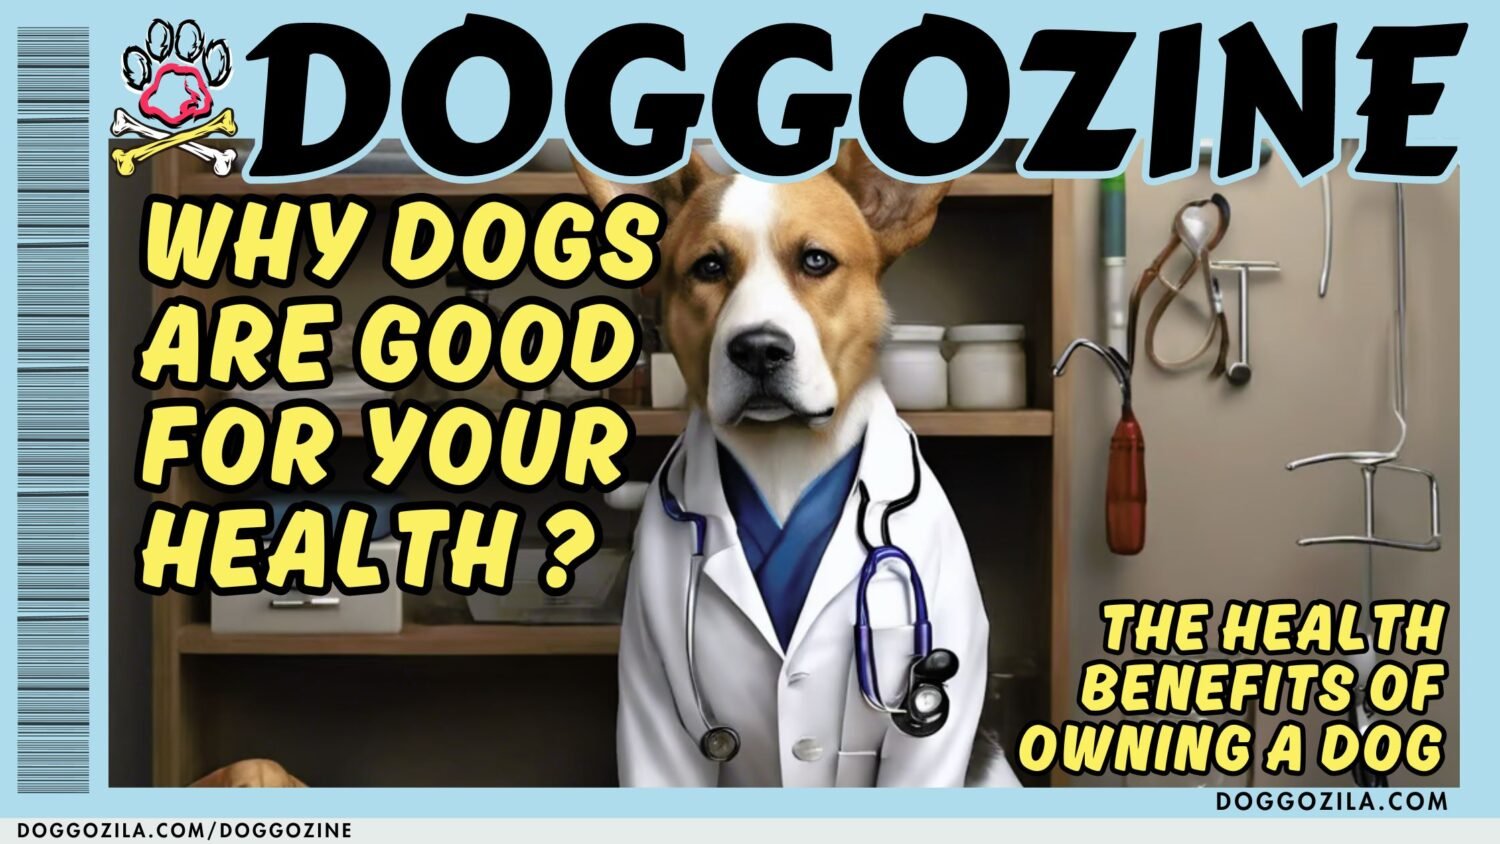 WHY DOGS ARE GOOD FOR YOUR HEALTH